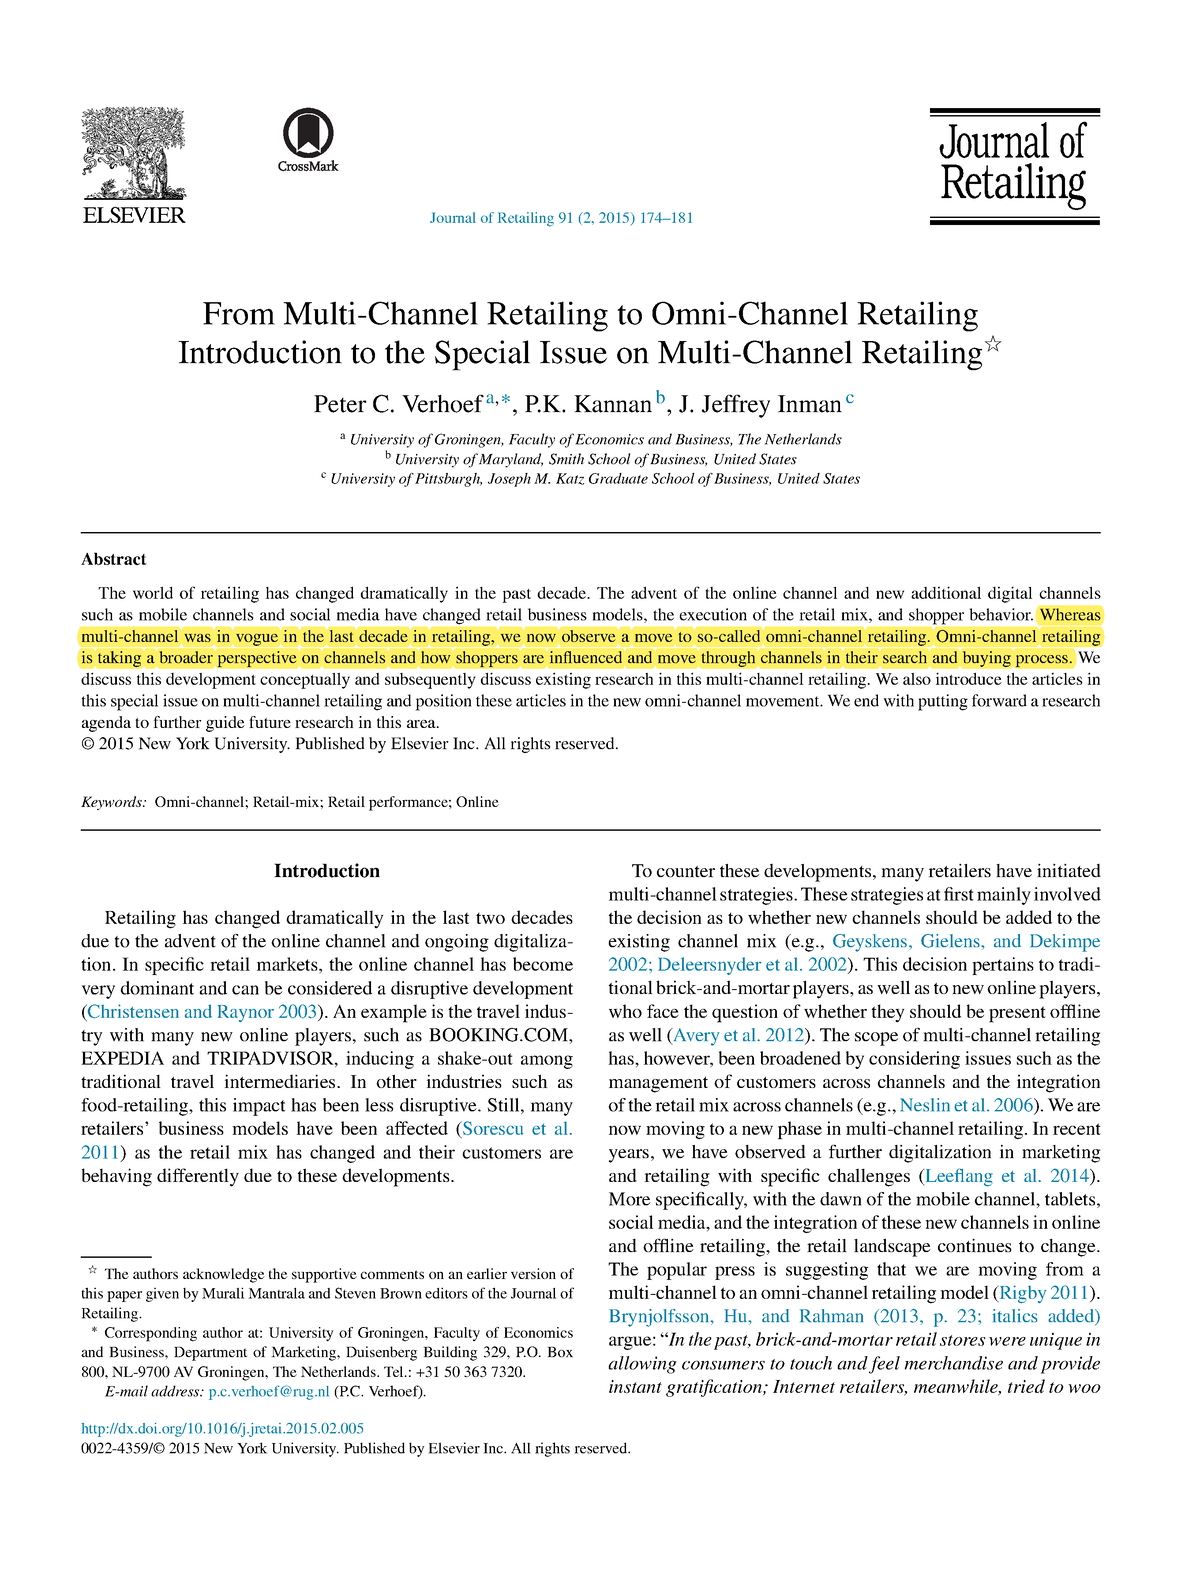 Week 8 From Multi-Channel to Omni-Channel Retailing - Journal of ...